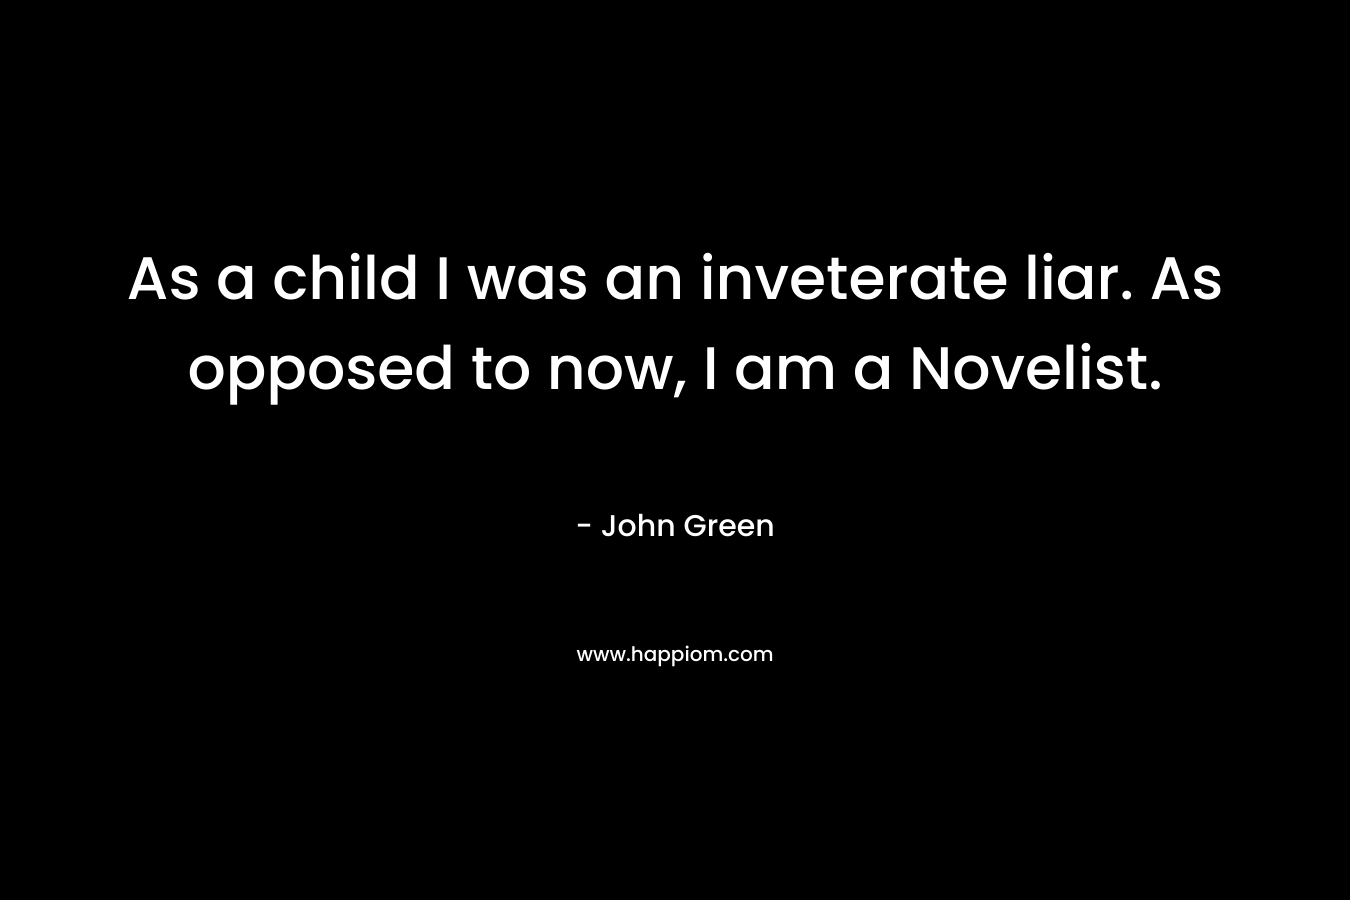 As a child I was an inveterate liar. As opposed to now, I am a Novelist.